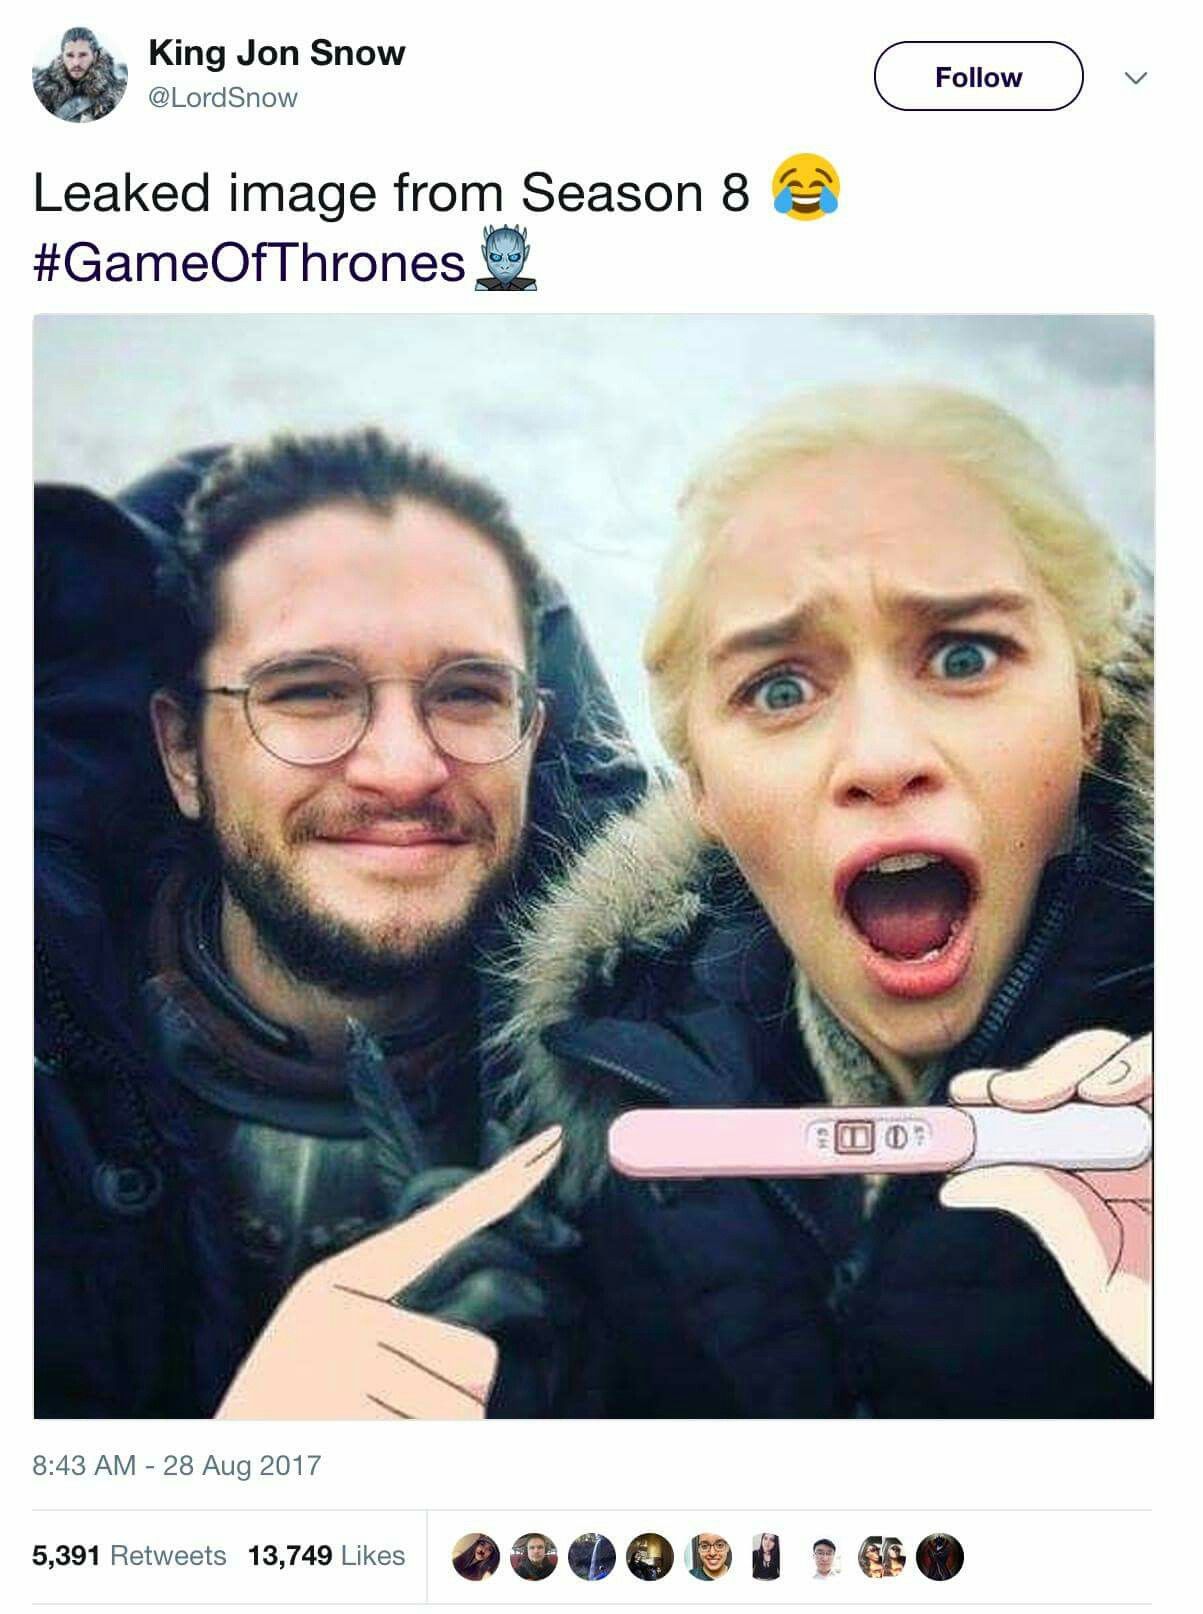 Funny Game of Thrones Season 8 premiere meme of John Snow and Denarius being pregnant with the text 'leaked image from Season 8'